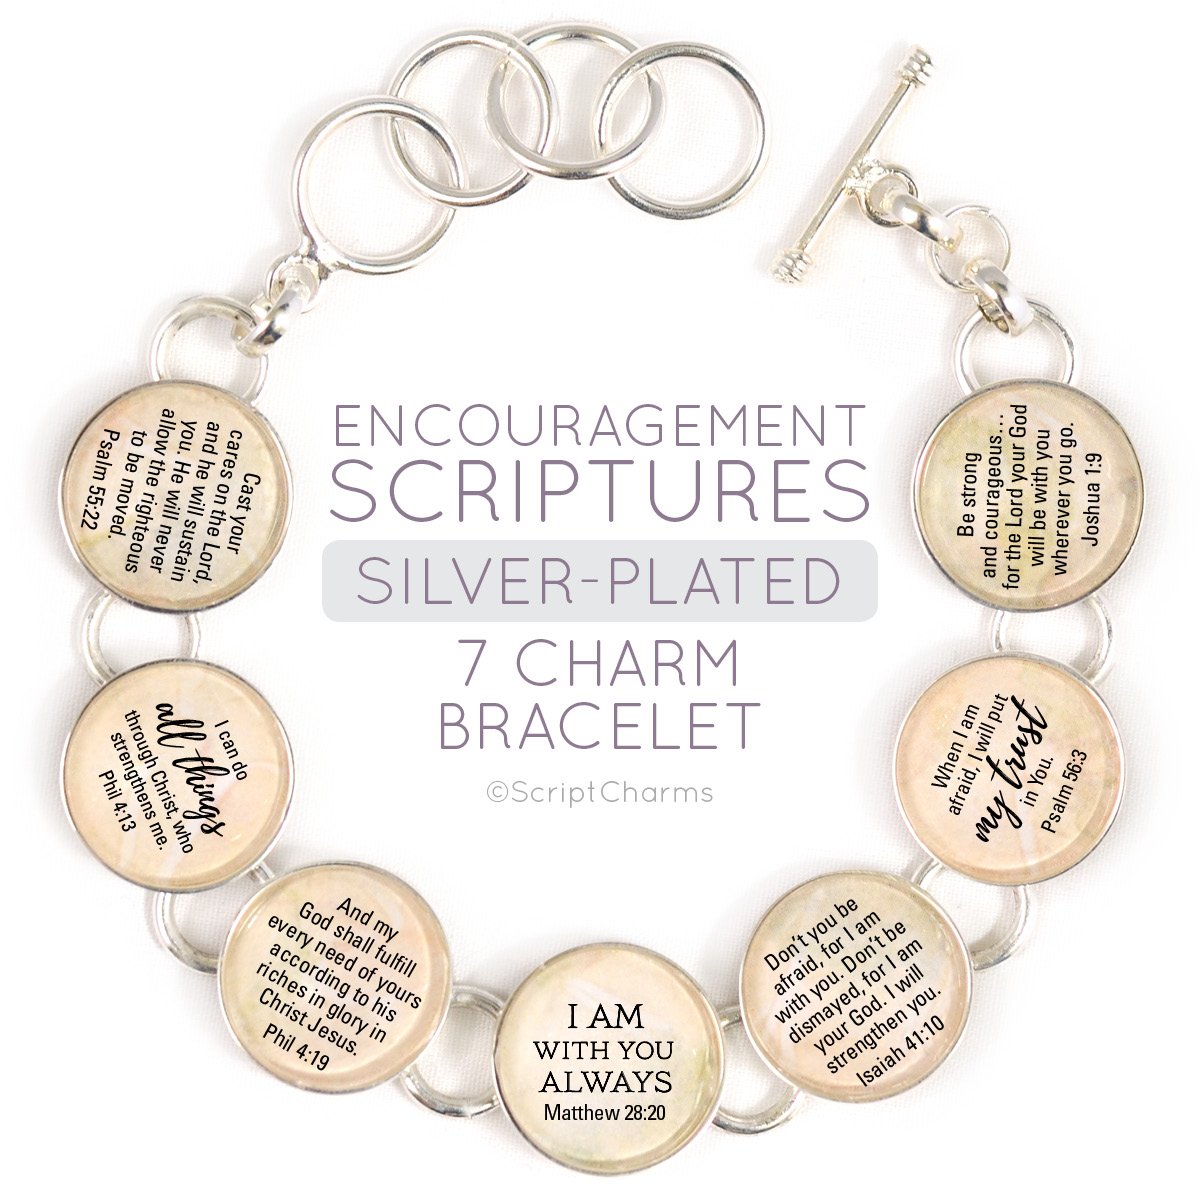 Encouraging Scripture Charm Bracelet - Handcrafted Silver-Plated Jewelry Bijou Her